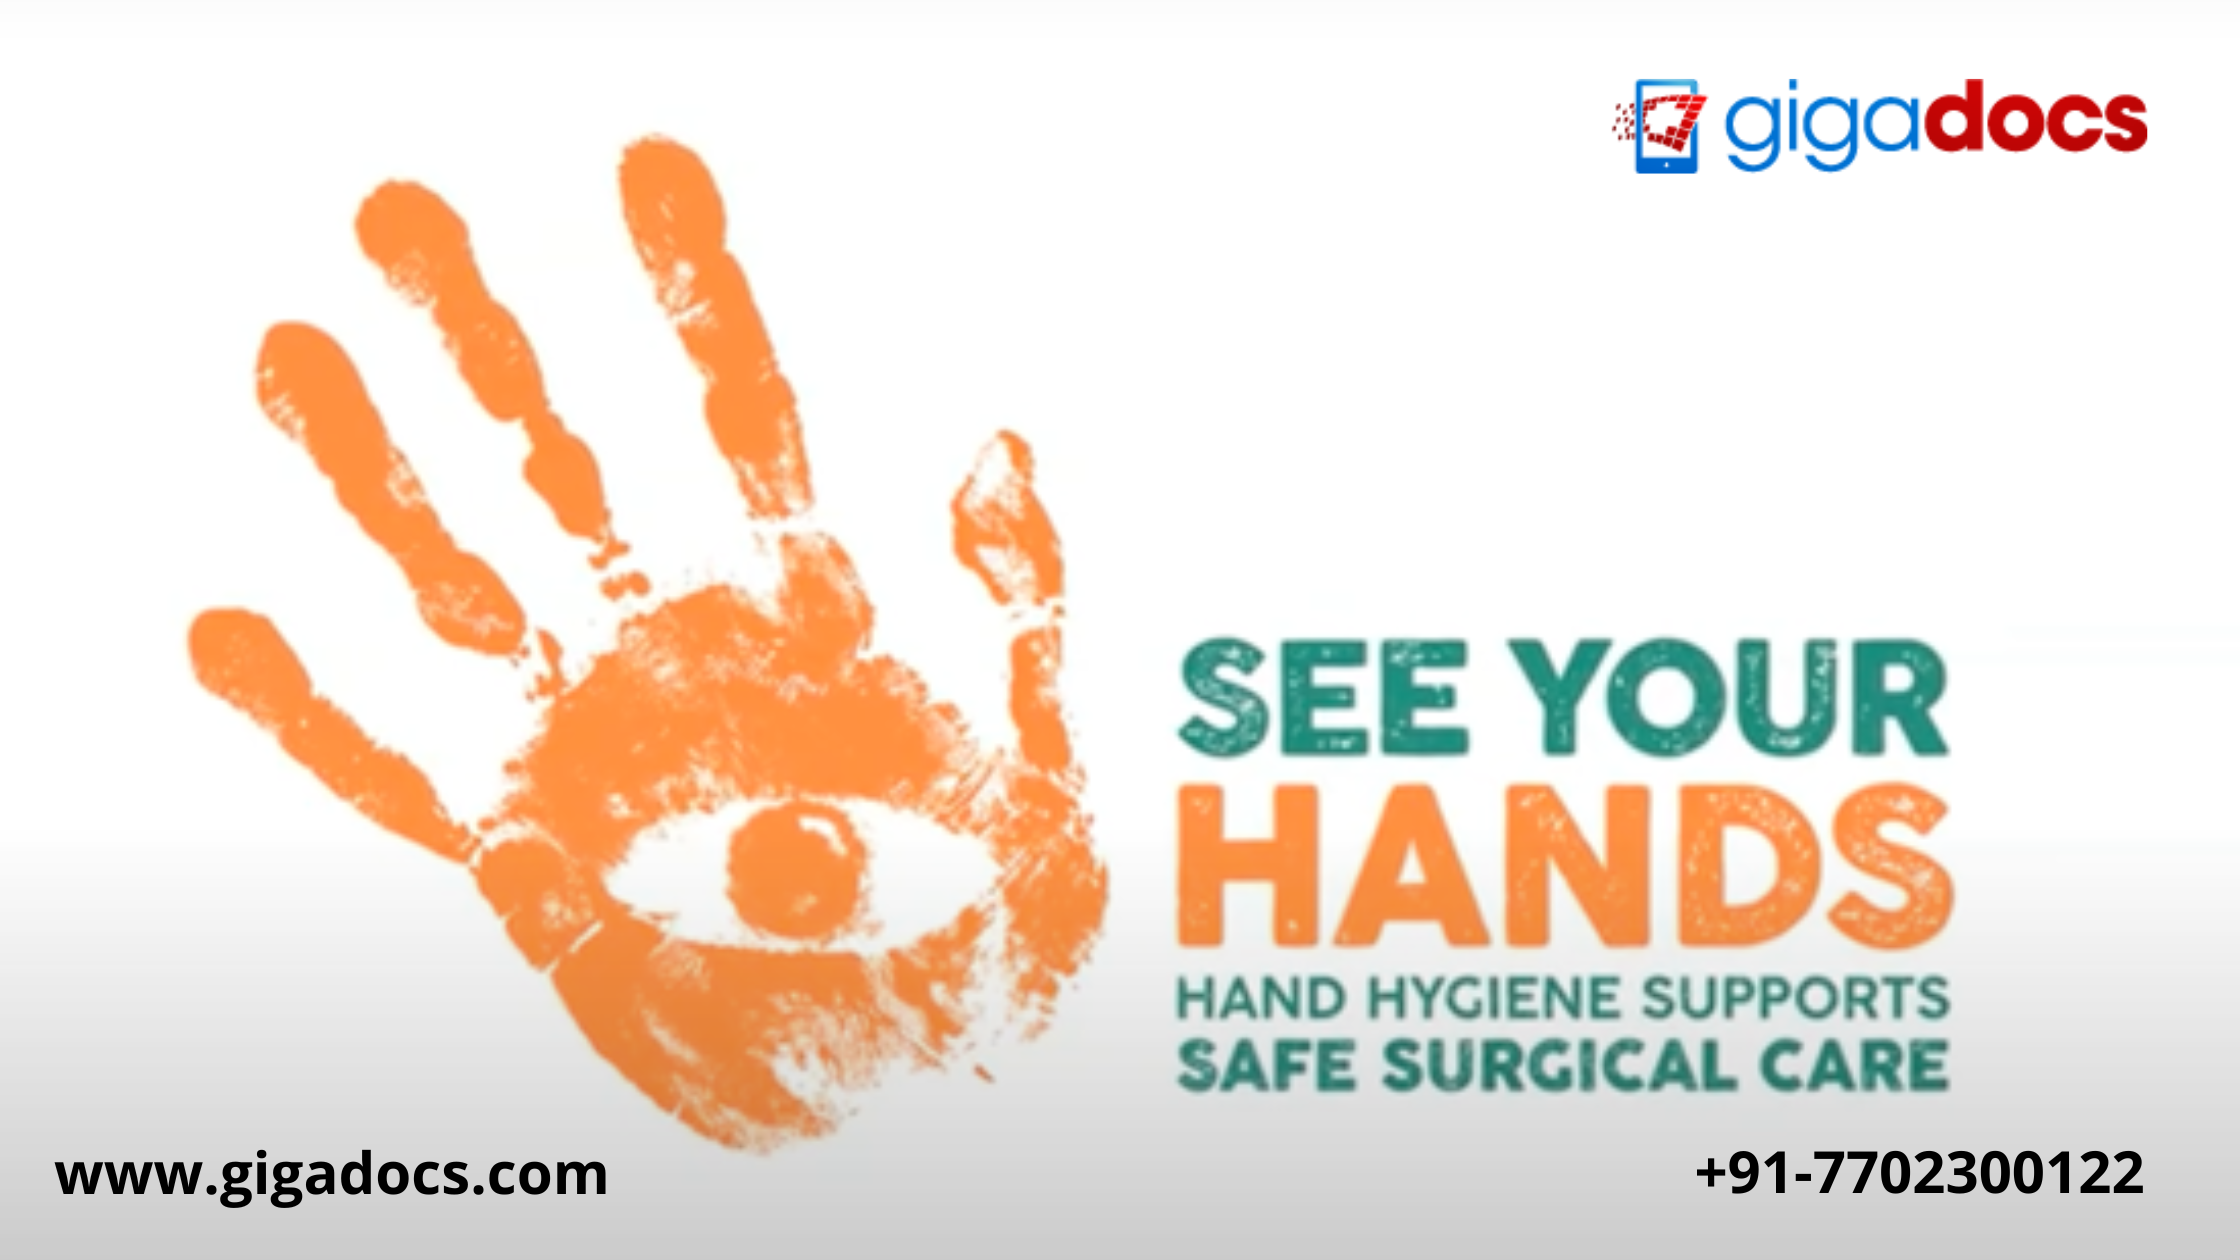 World Hand Hygiene Day The Importance of Hand Washing for Disease